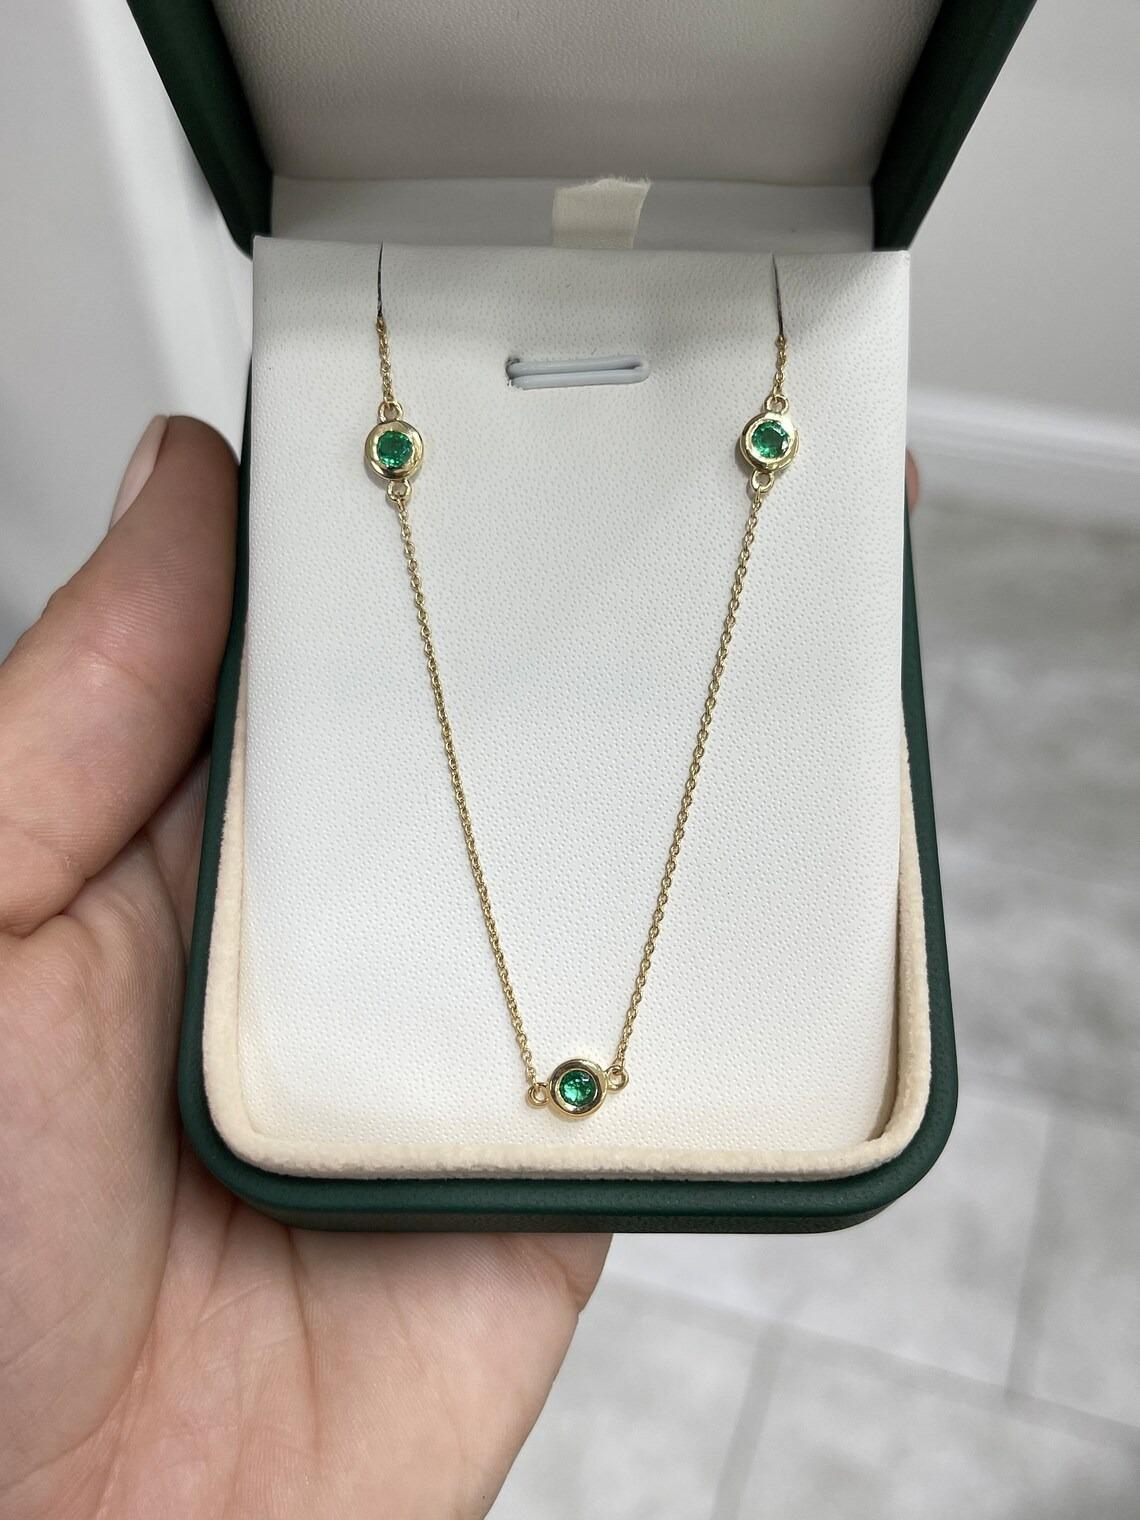 A remarkable emerald by the yard necklace crafted to perfection. This piece features five, stunning natural round-cut emeralds from the origin of Zambia; which showcase a desirable medium-dark green color, with very good clarity and luster.